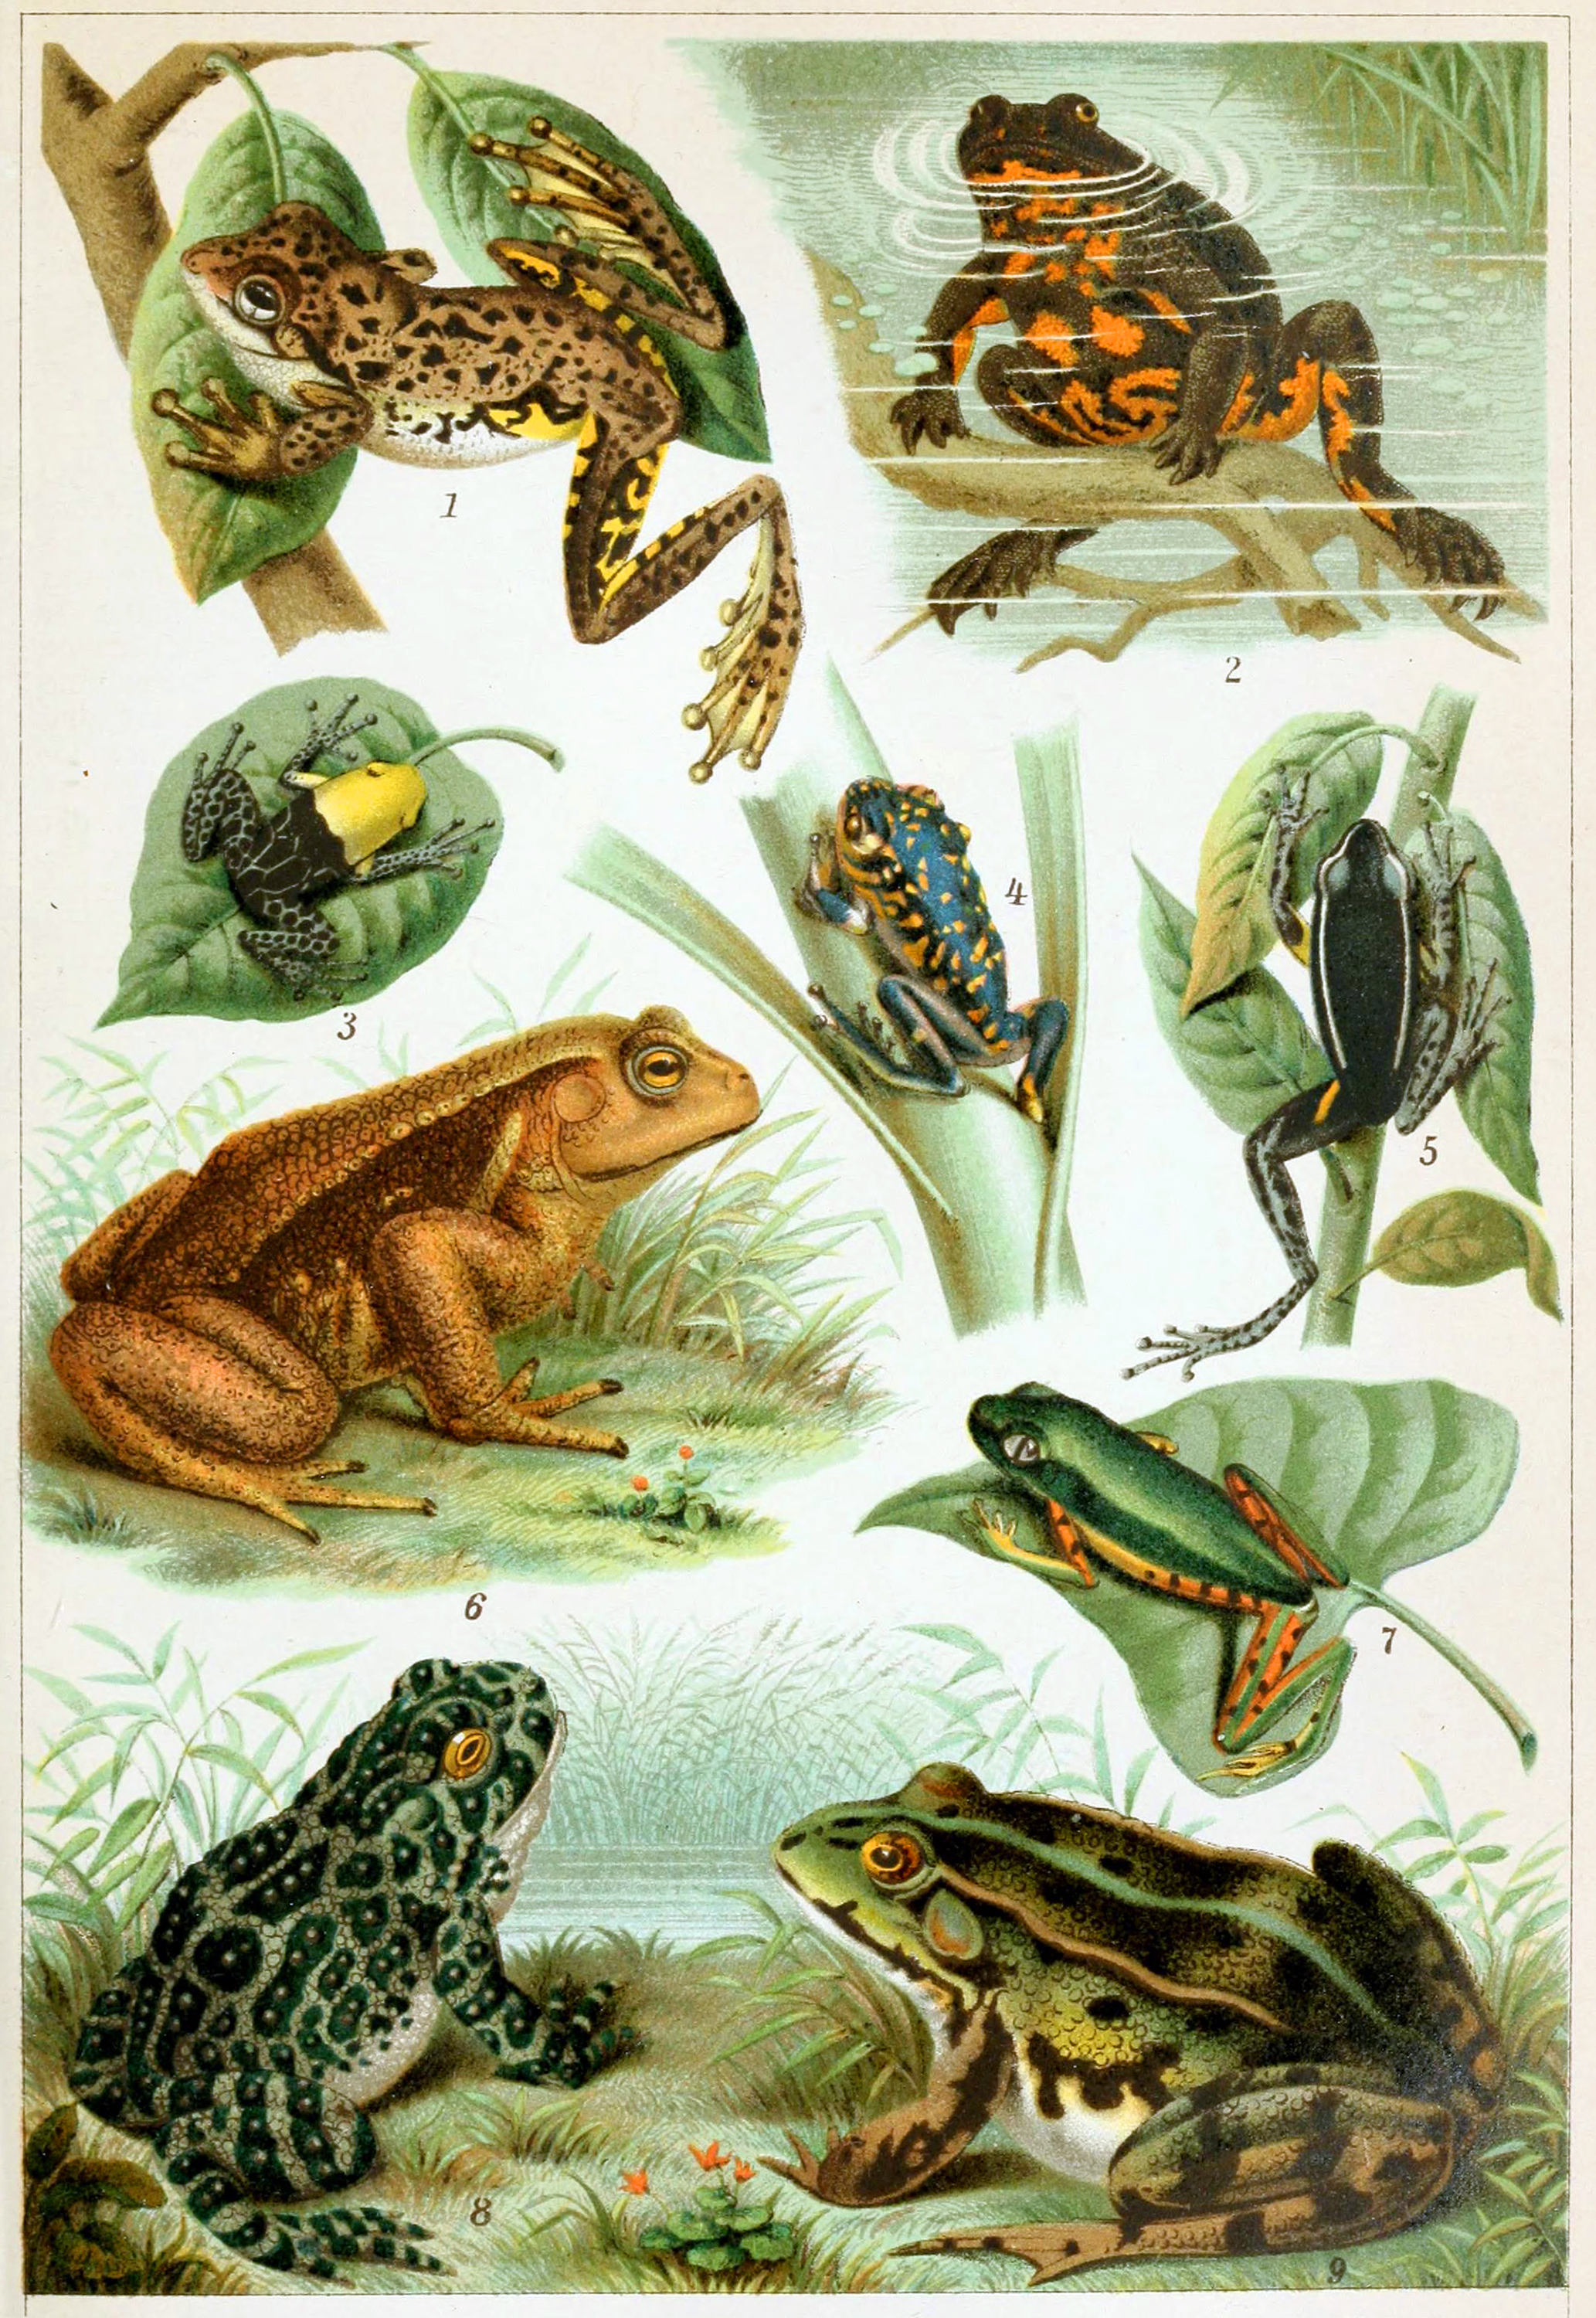 What family are frogs?